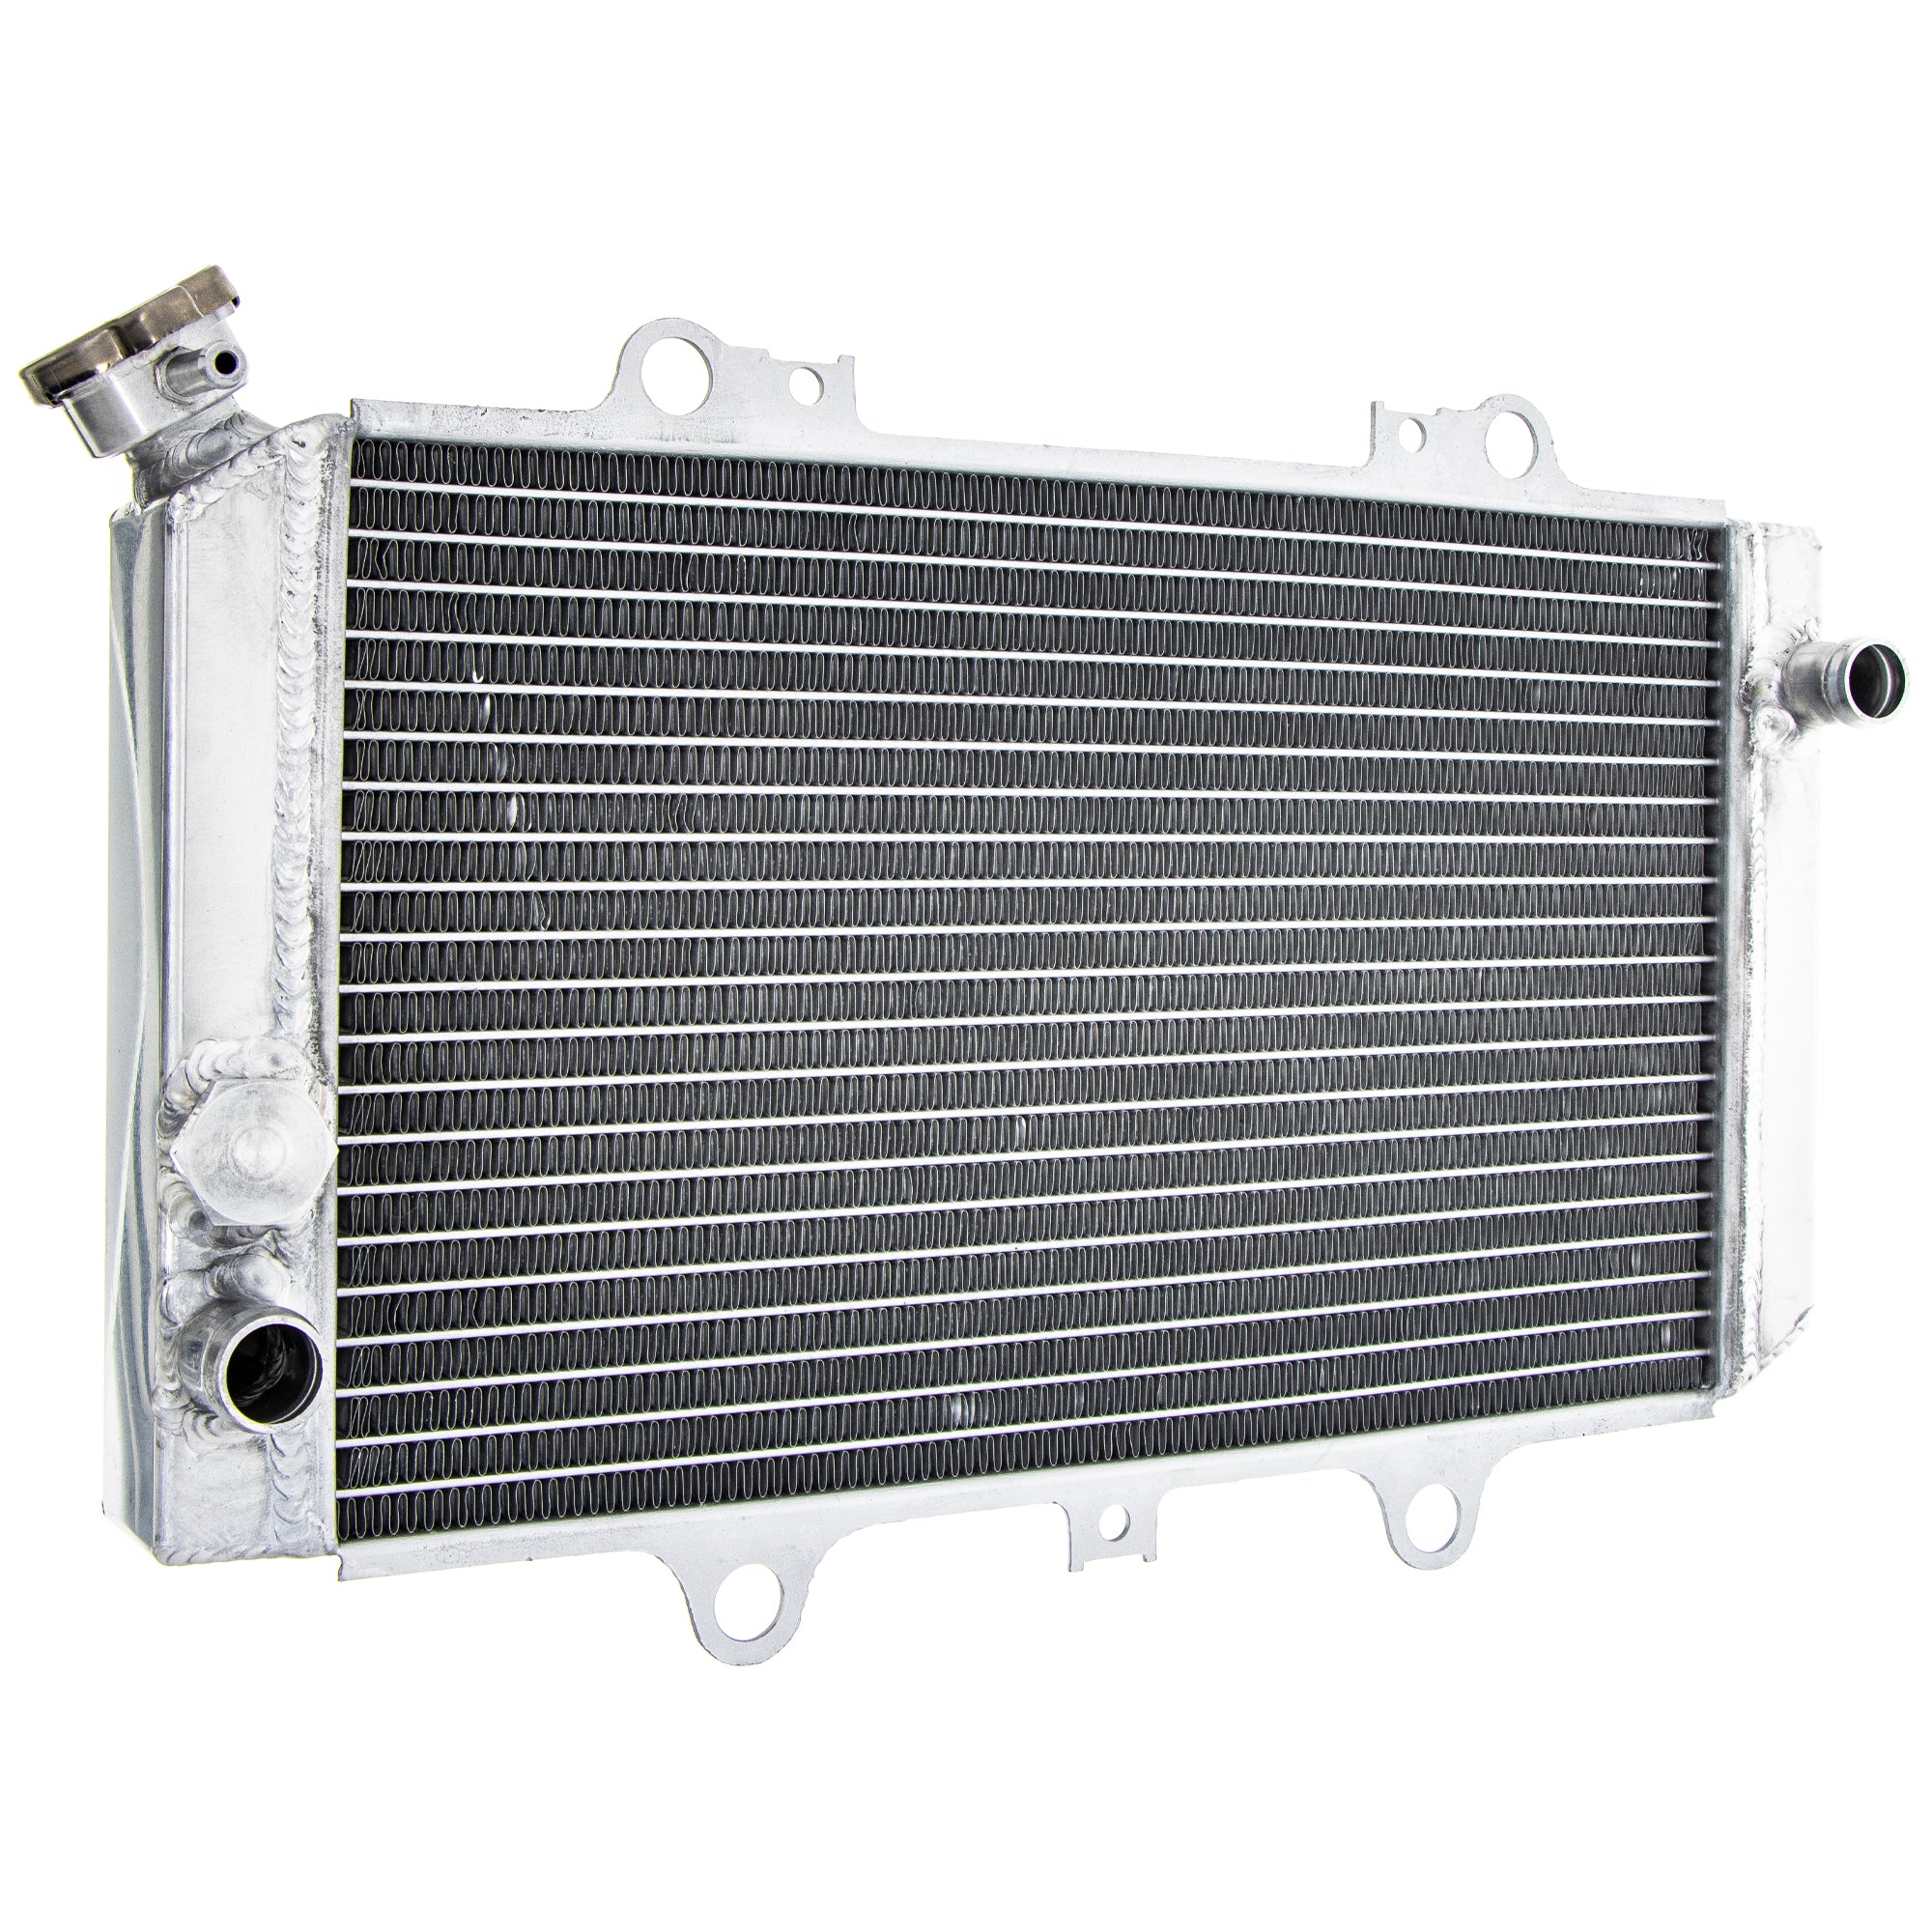 High Capacity Radiator for Yamaha Grizzly 5KM-12461-00-00 NICHE 519-CRD2224A